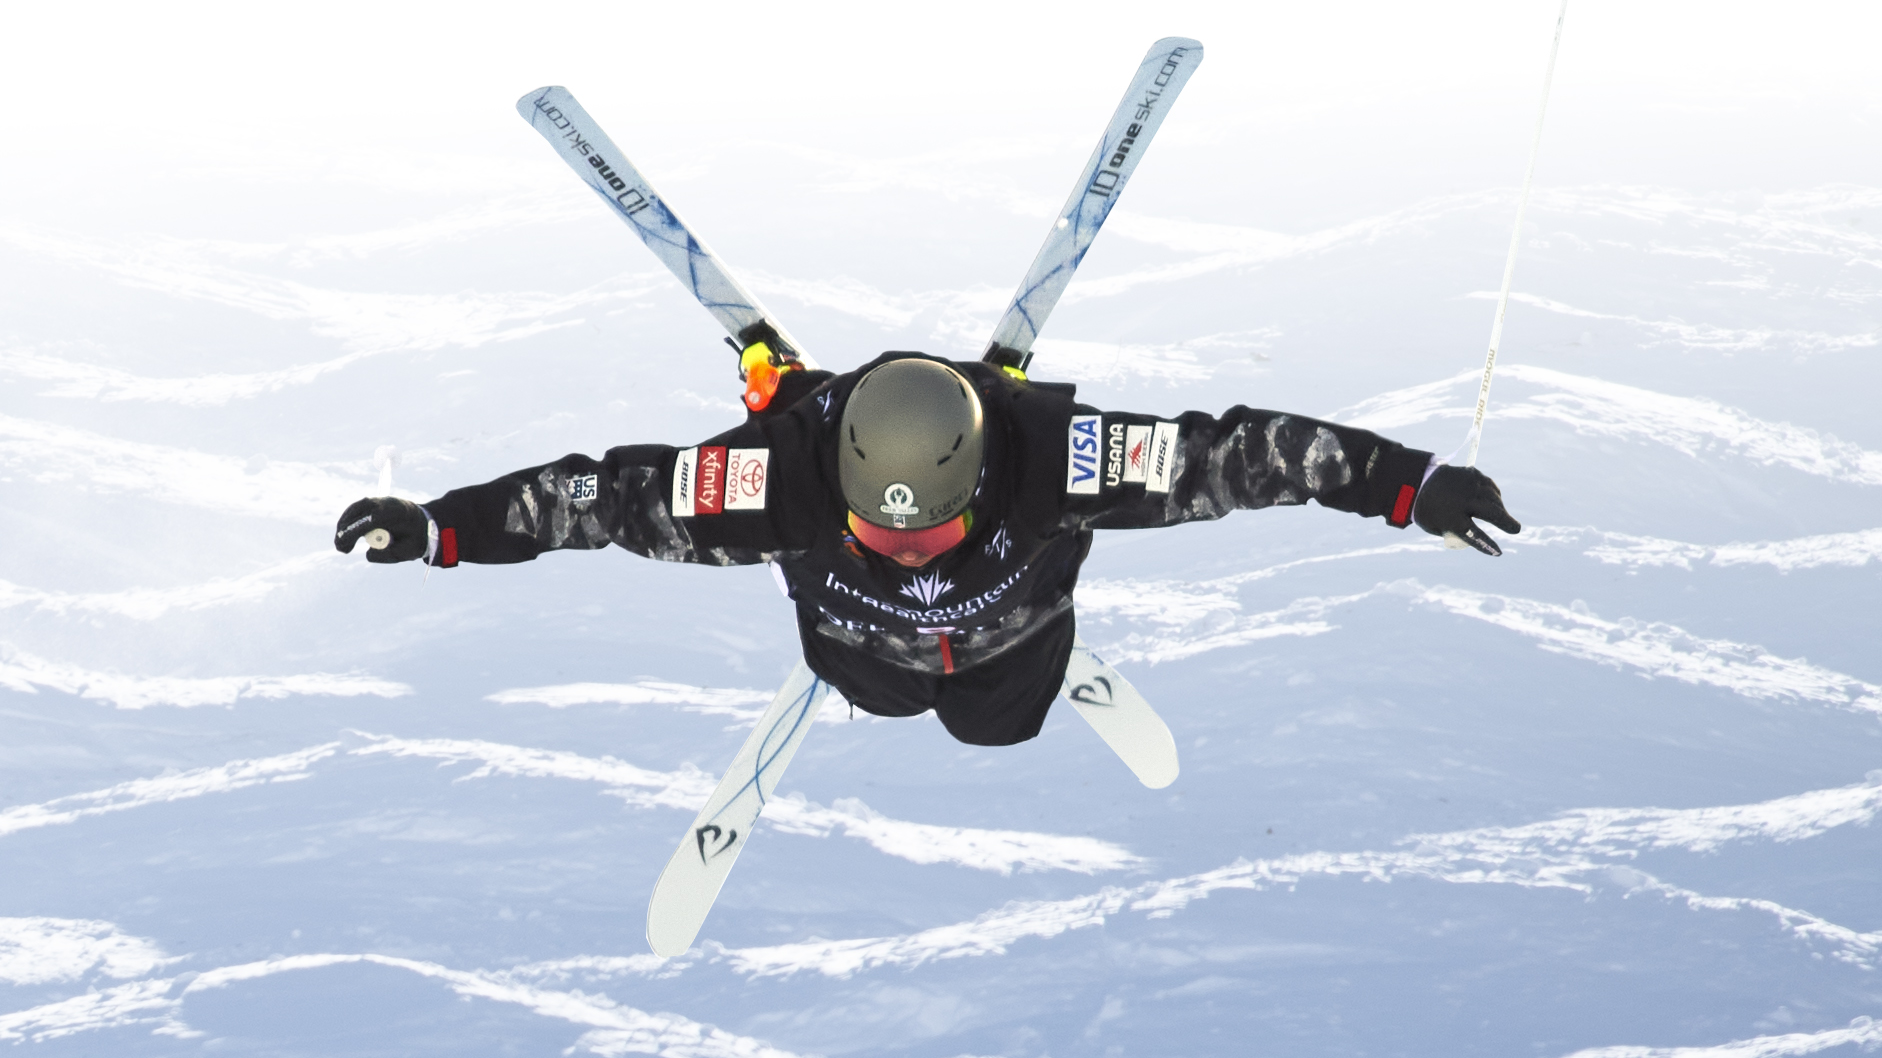 Brad Wilson performs a backflip during the 2019 FIS World Championships at Deer
Valley, Utah. Photo credit: Kelly Gorham.